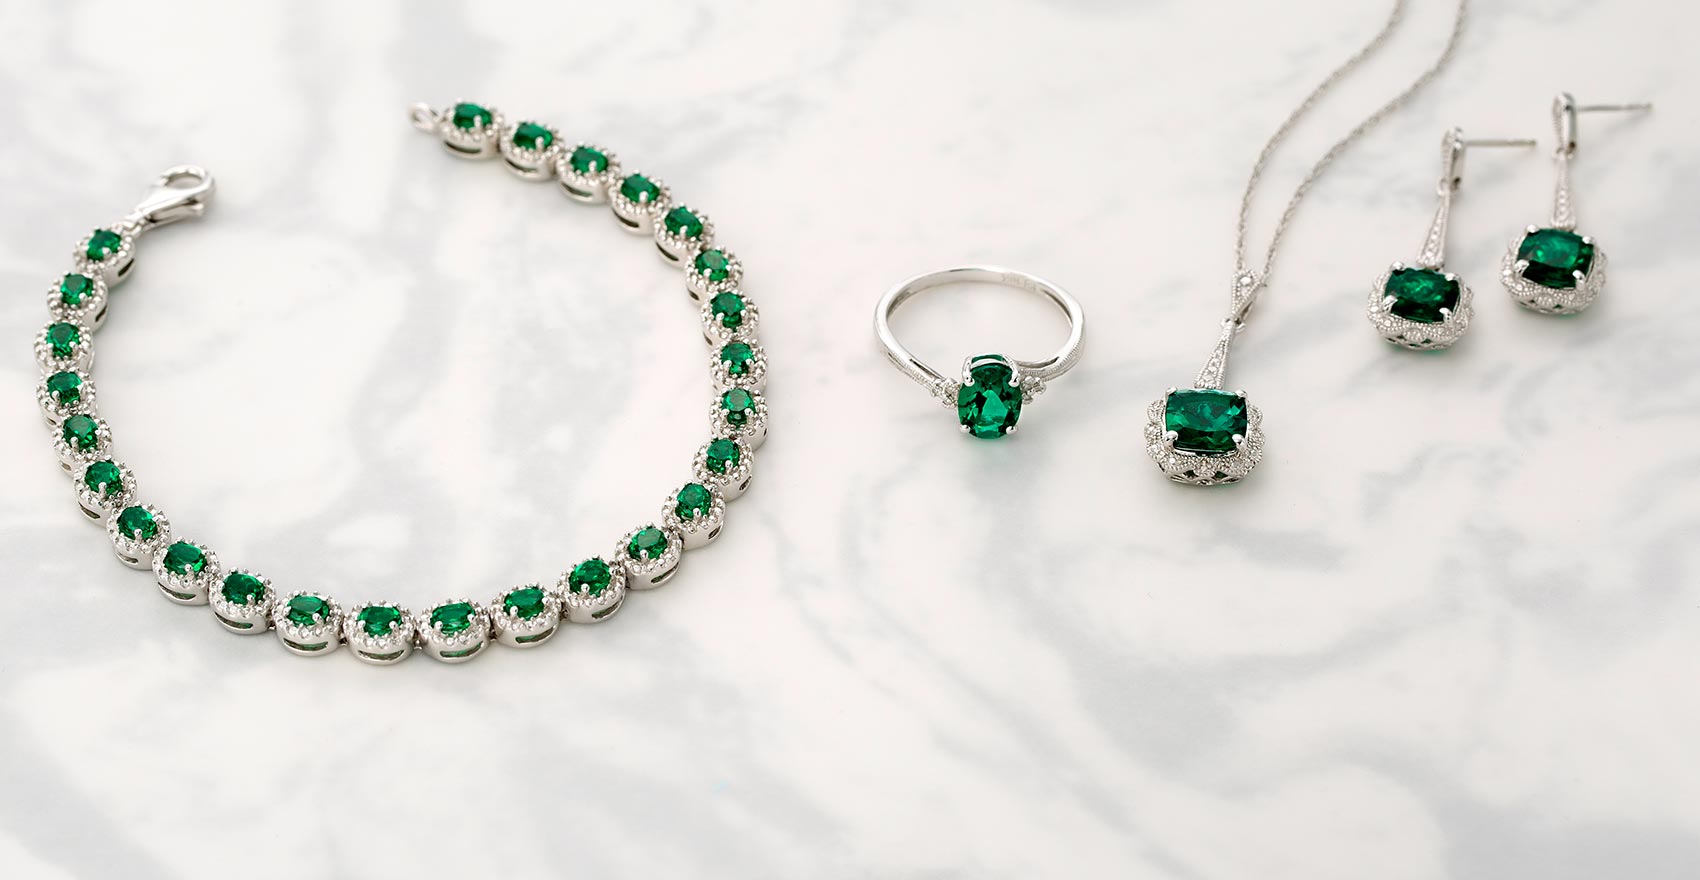 Matching jade jewelry set: necklace, earrings, ring and bracelet on a marble background